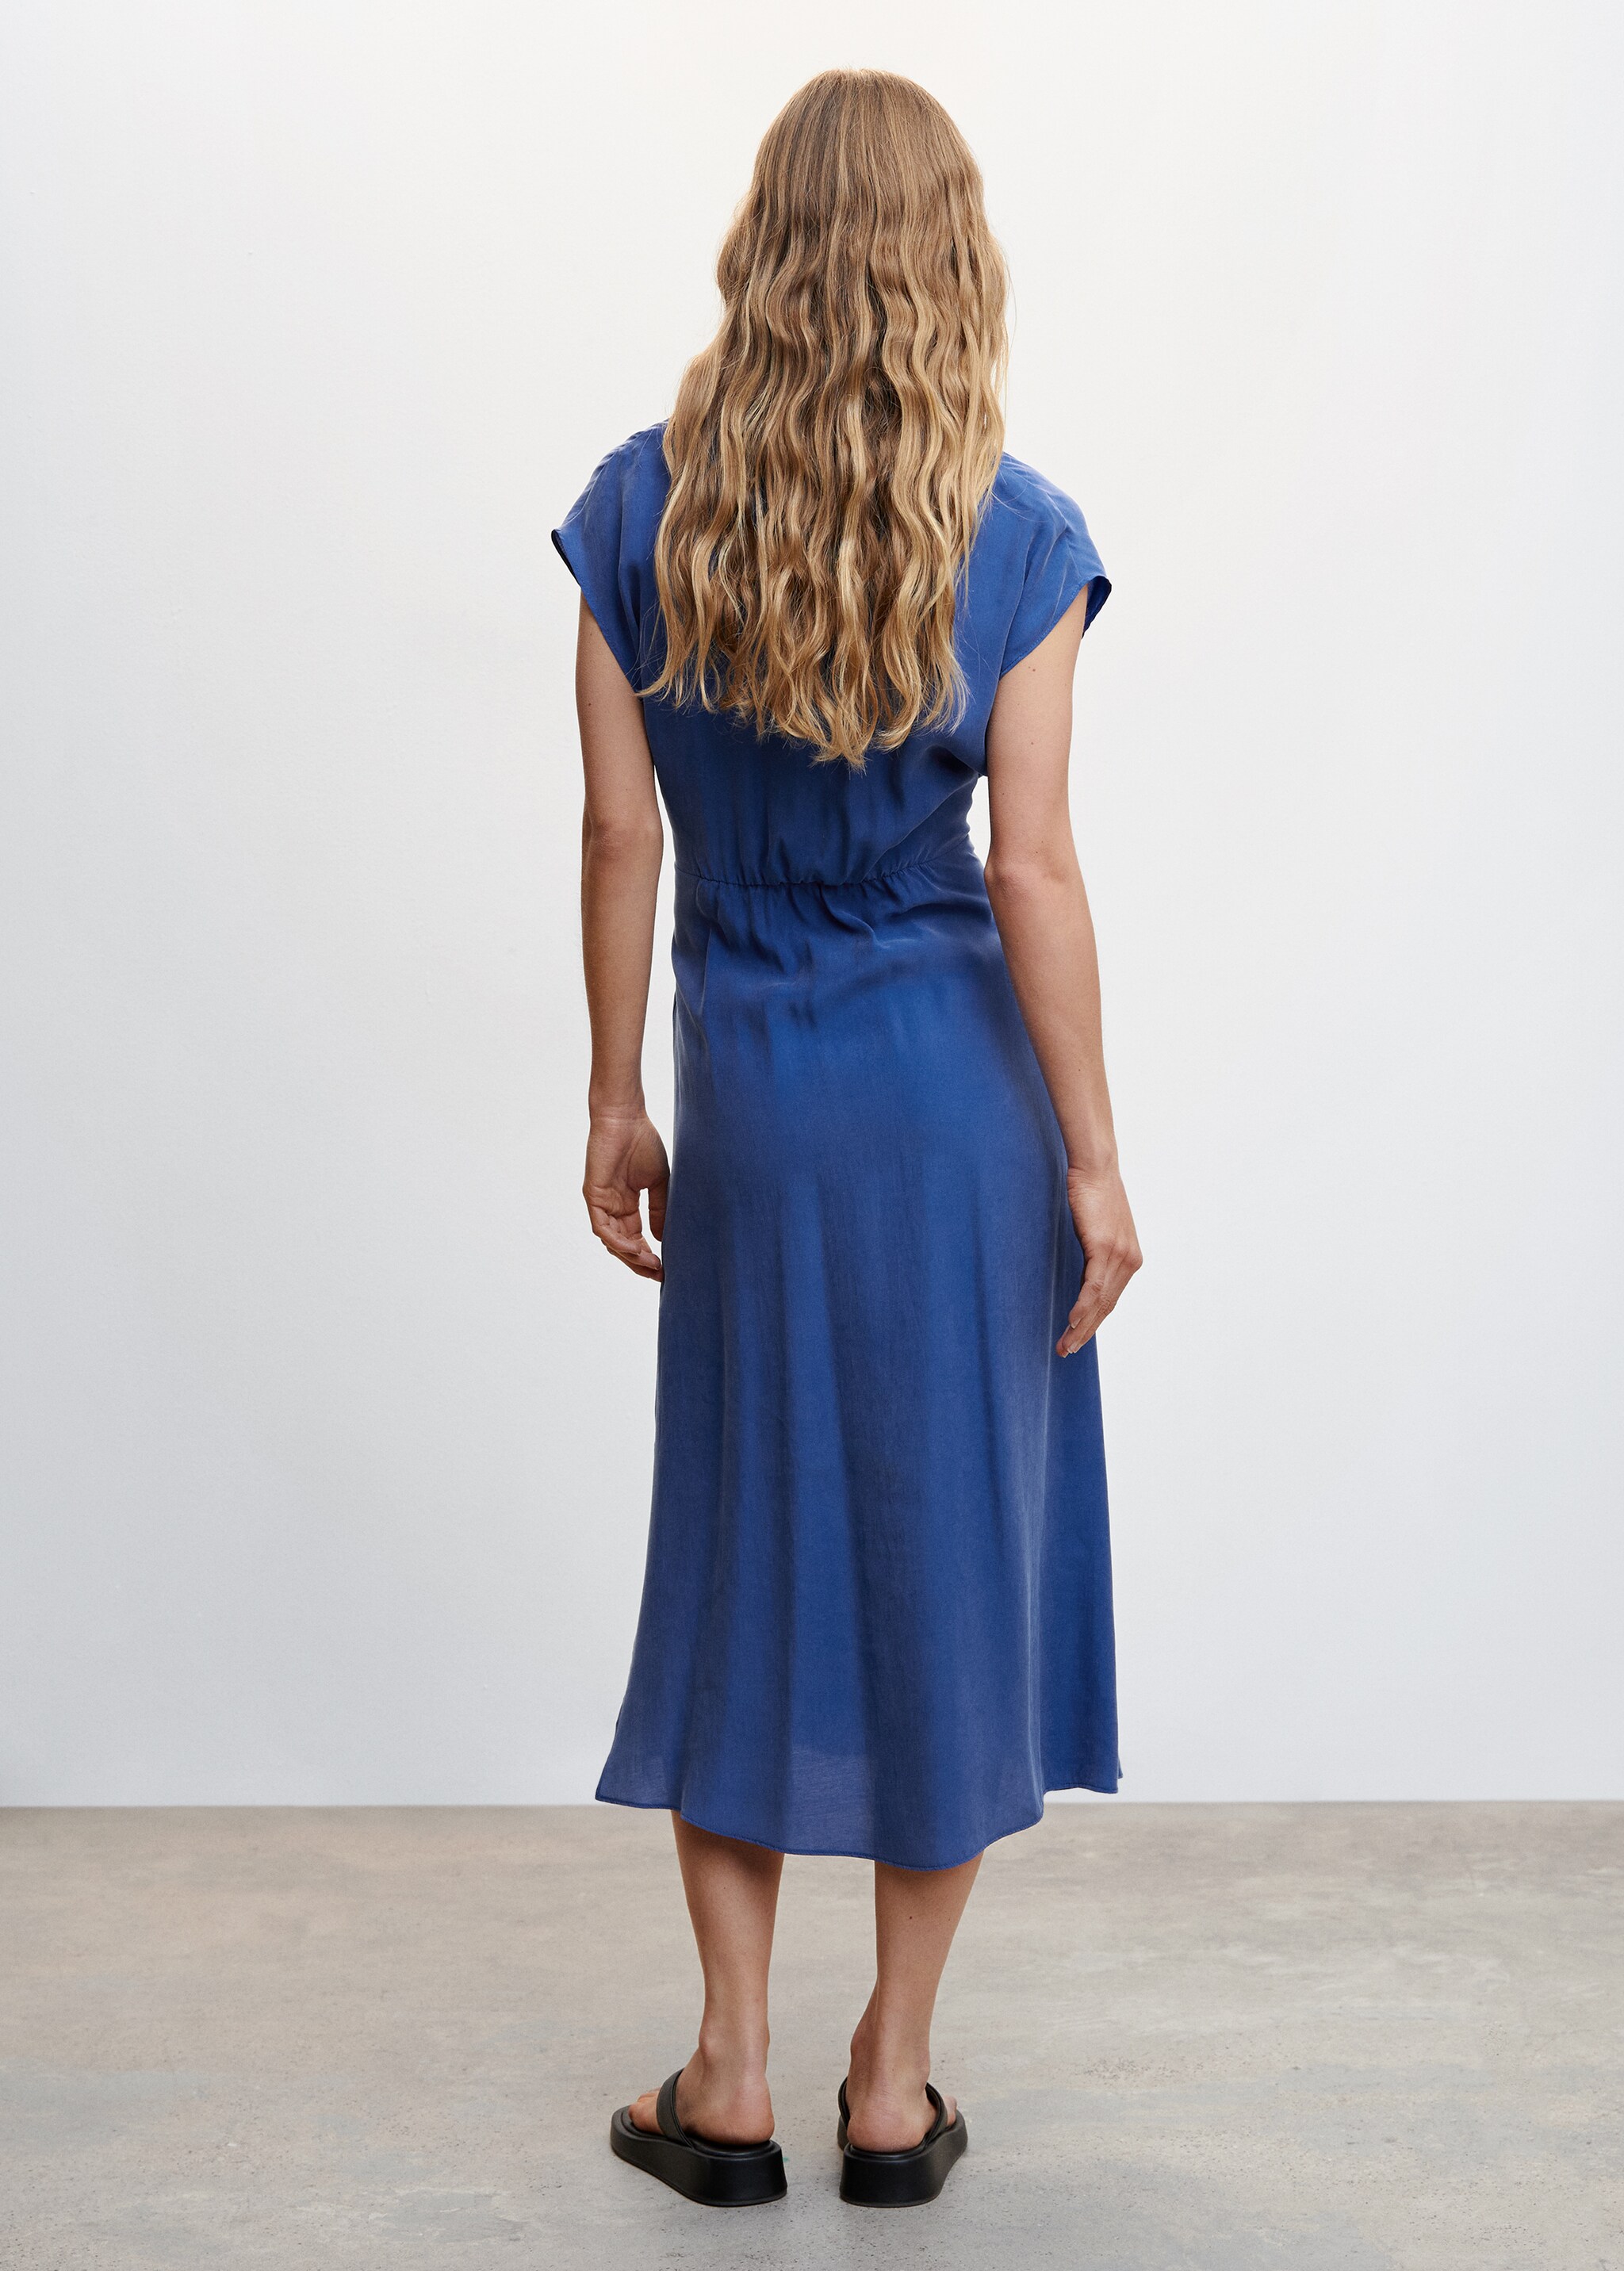 Bow shirt dress - Reverse of the article